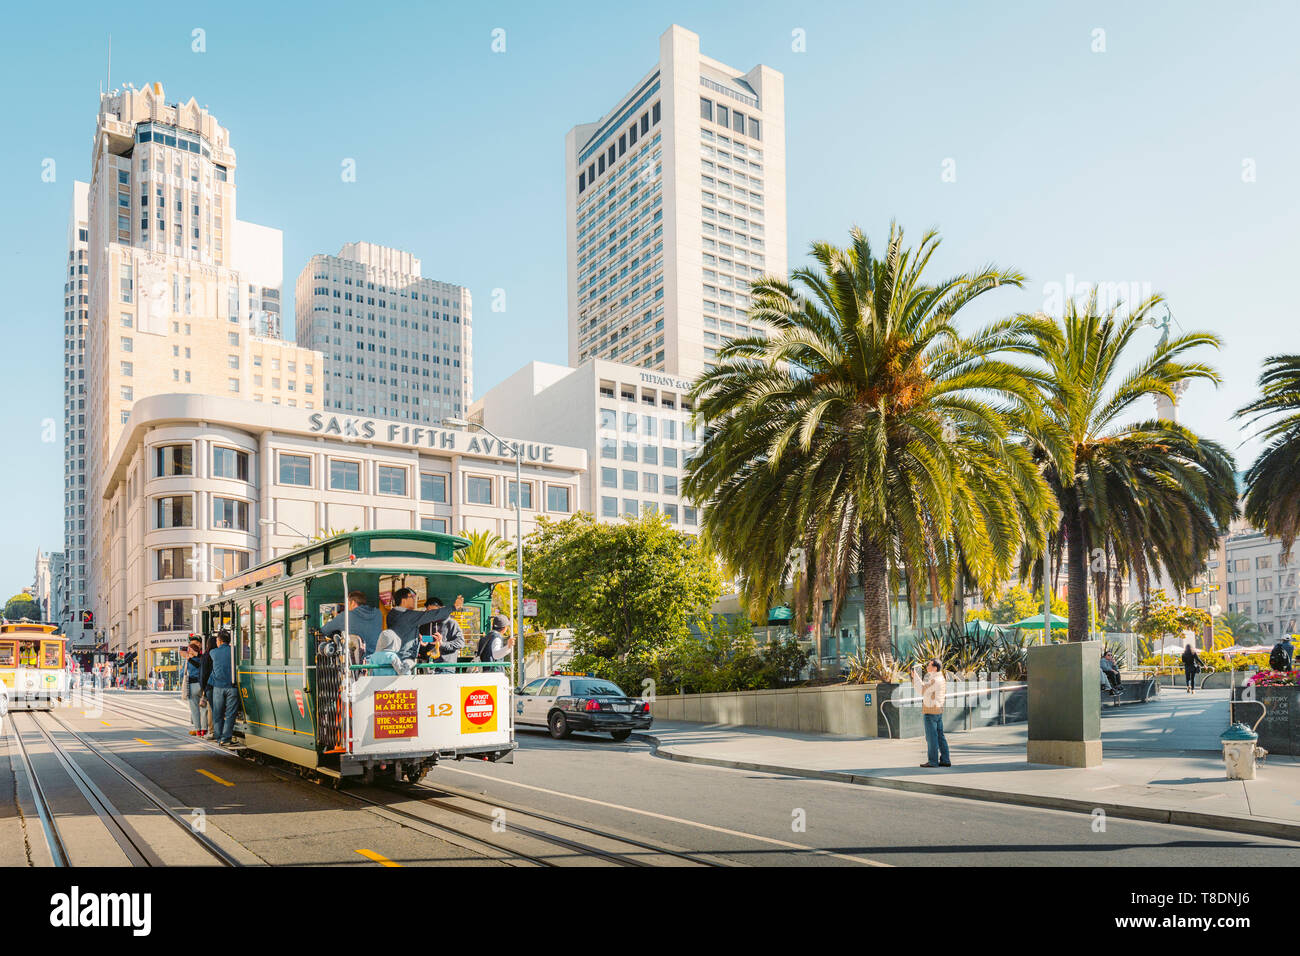 SEPTEMBER 4, 2016 - SAN FRANCISCO: Traditional Powell-Hyde cable cars at Union Square in central San Francisco in beautiful golden morning light, Cali Stock Photo